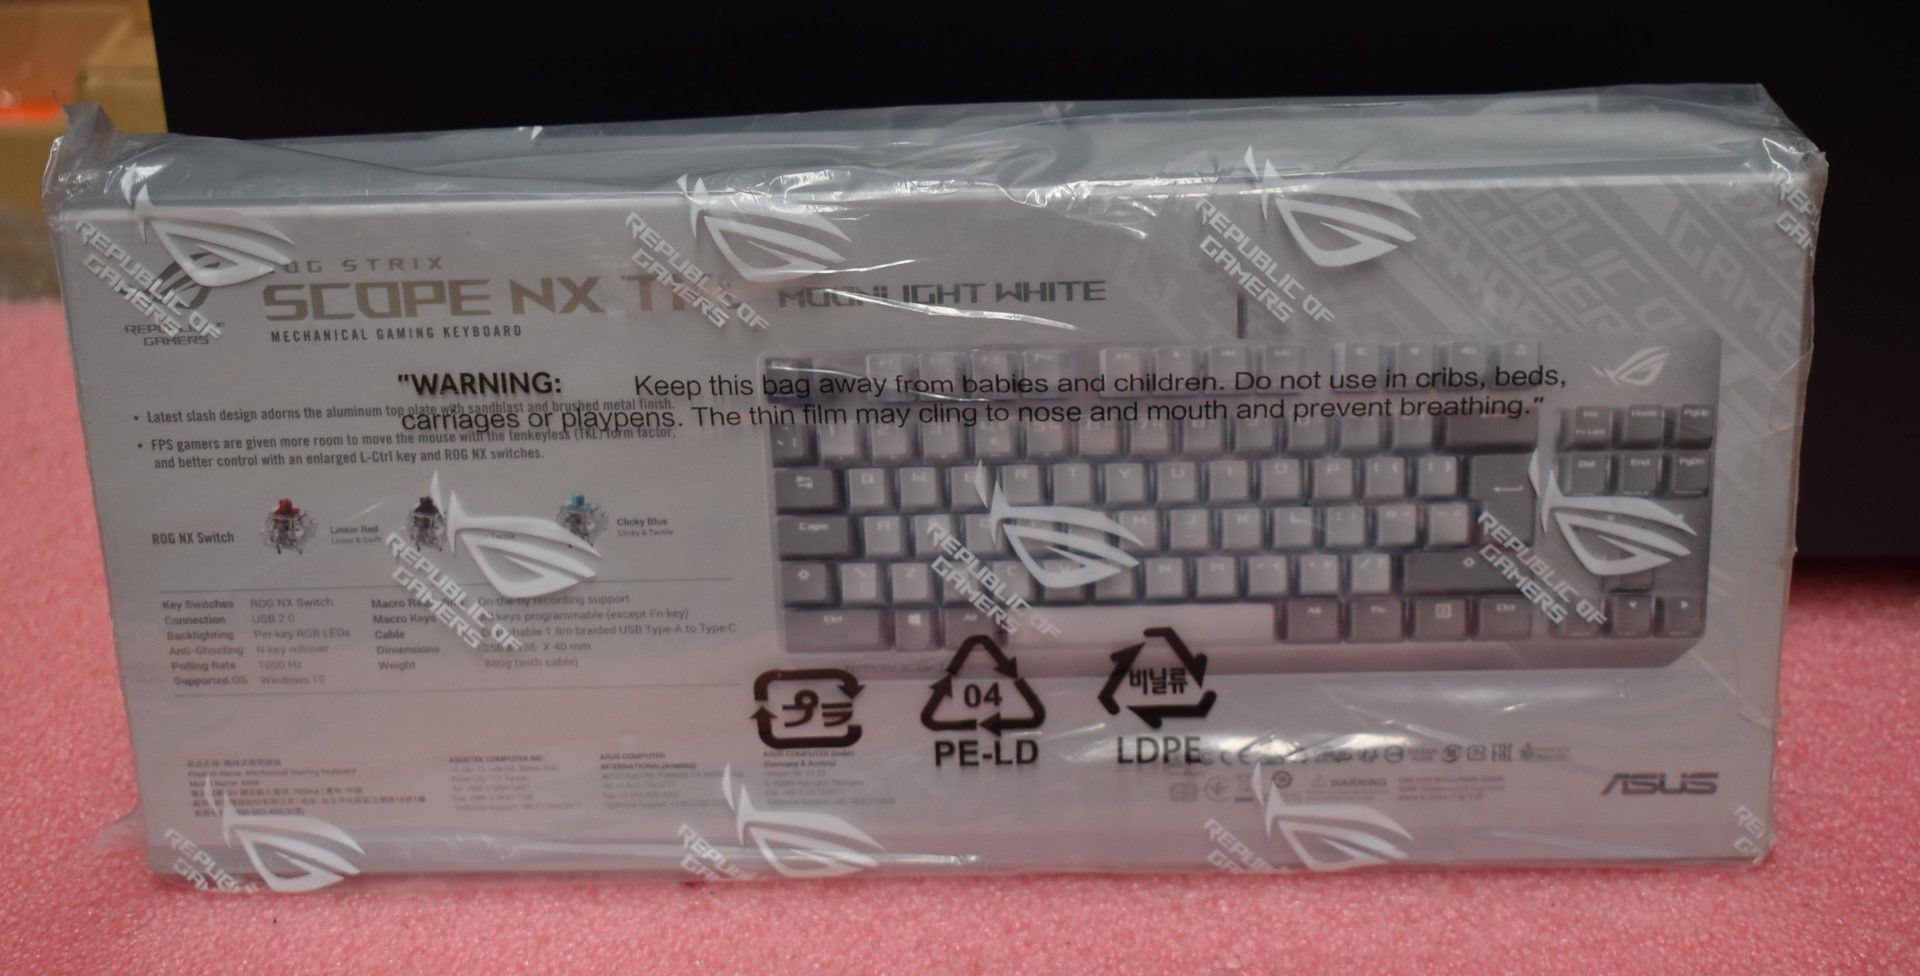 1 x Asus ROG Strix Scope NX TKL Moonlight White Wired Mechanical RGB Gaming Keyboard - Features - Image 6 of 6